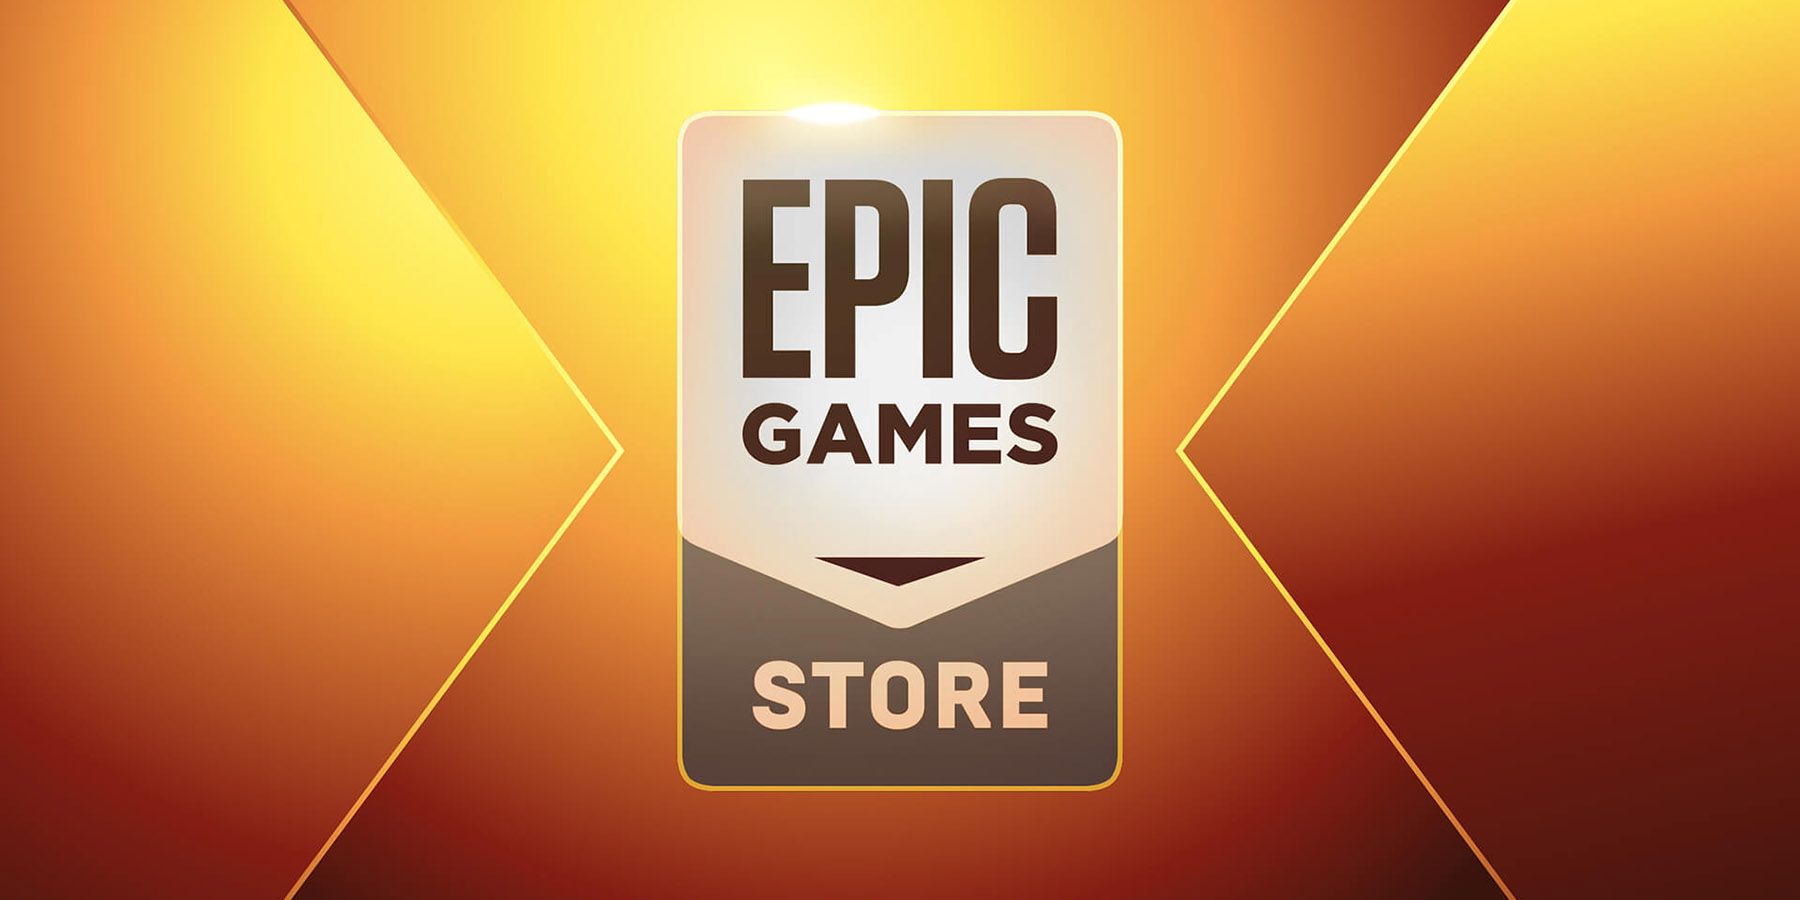 epic-games-store-1